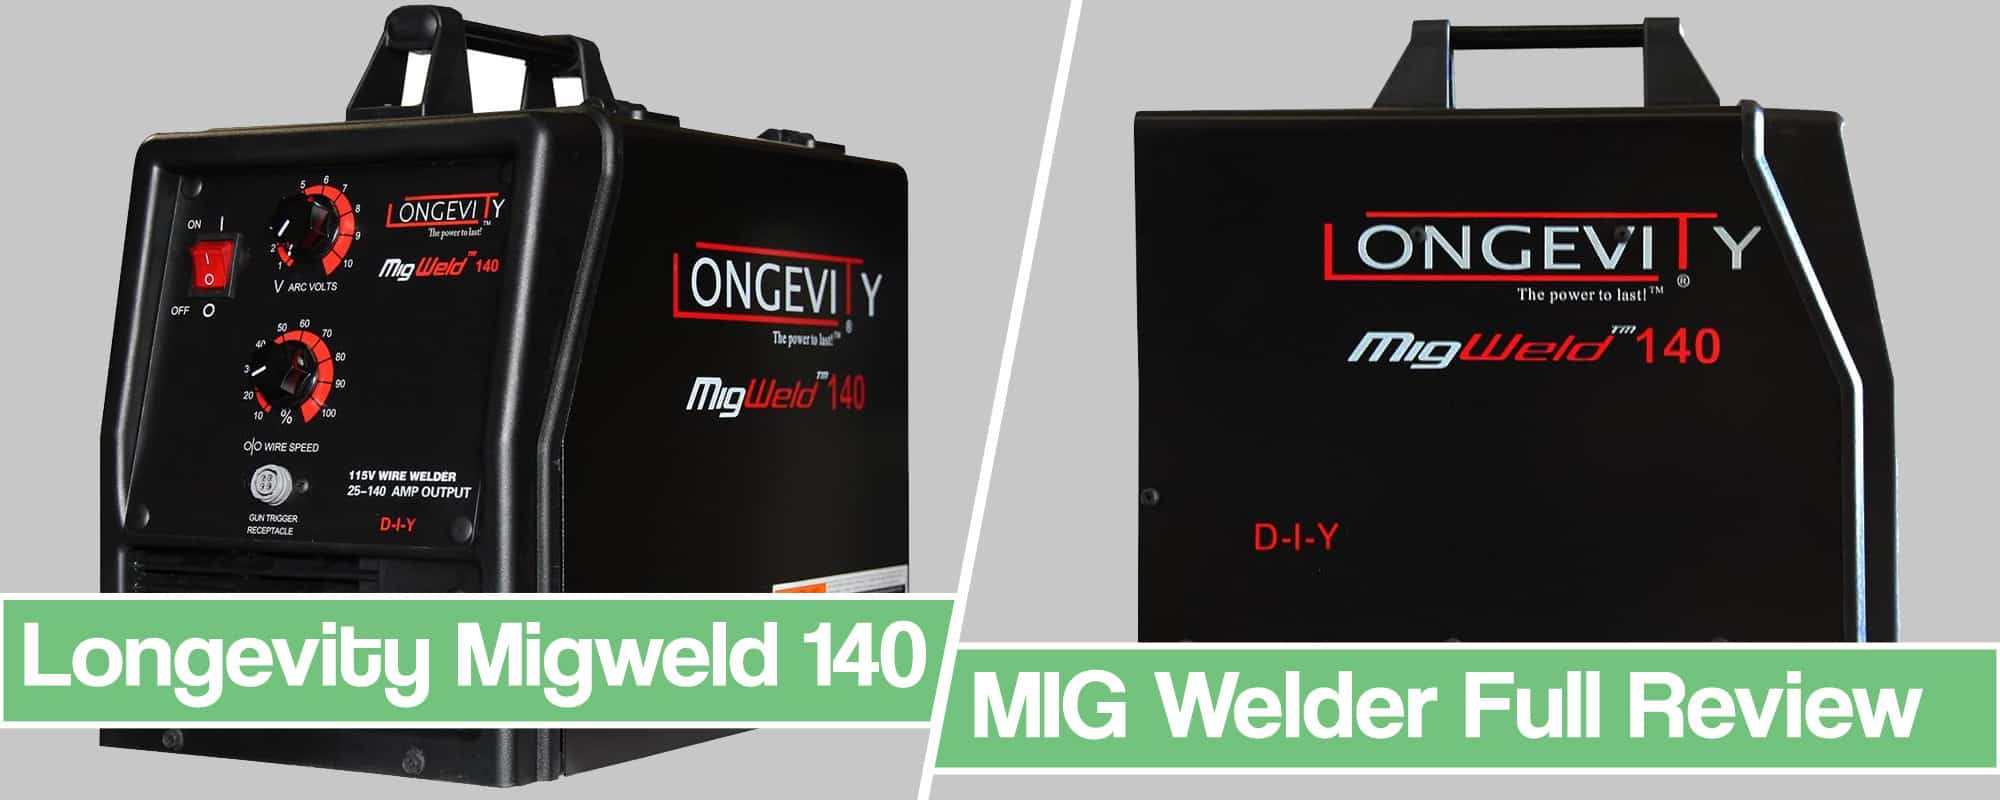 Feature image for Longevity migweld 140 review article